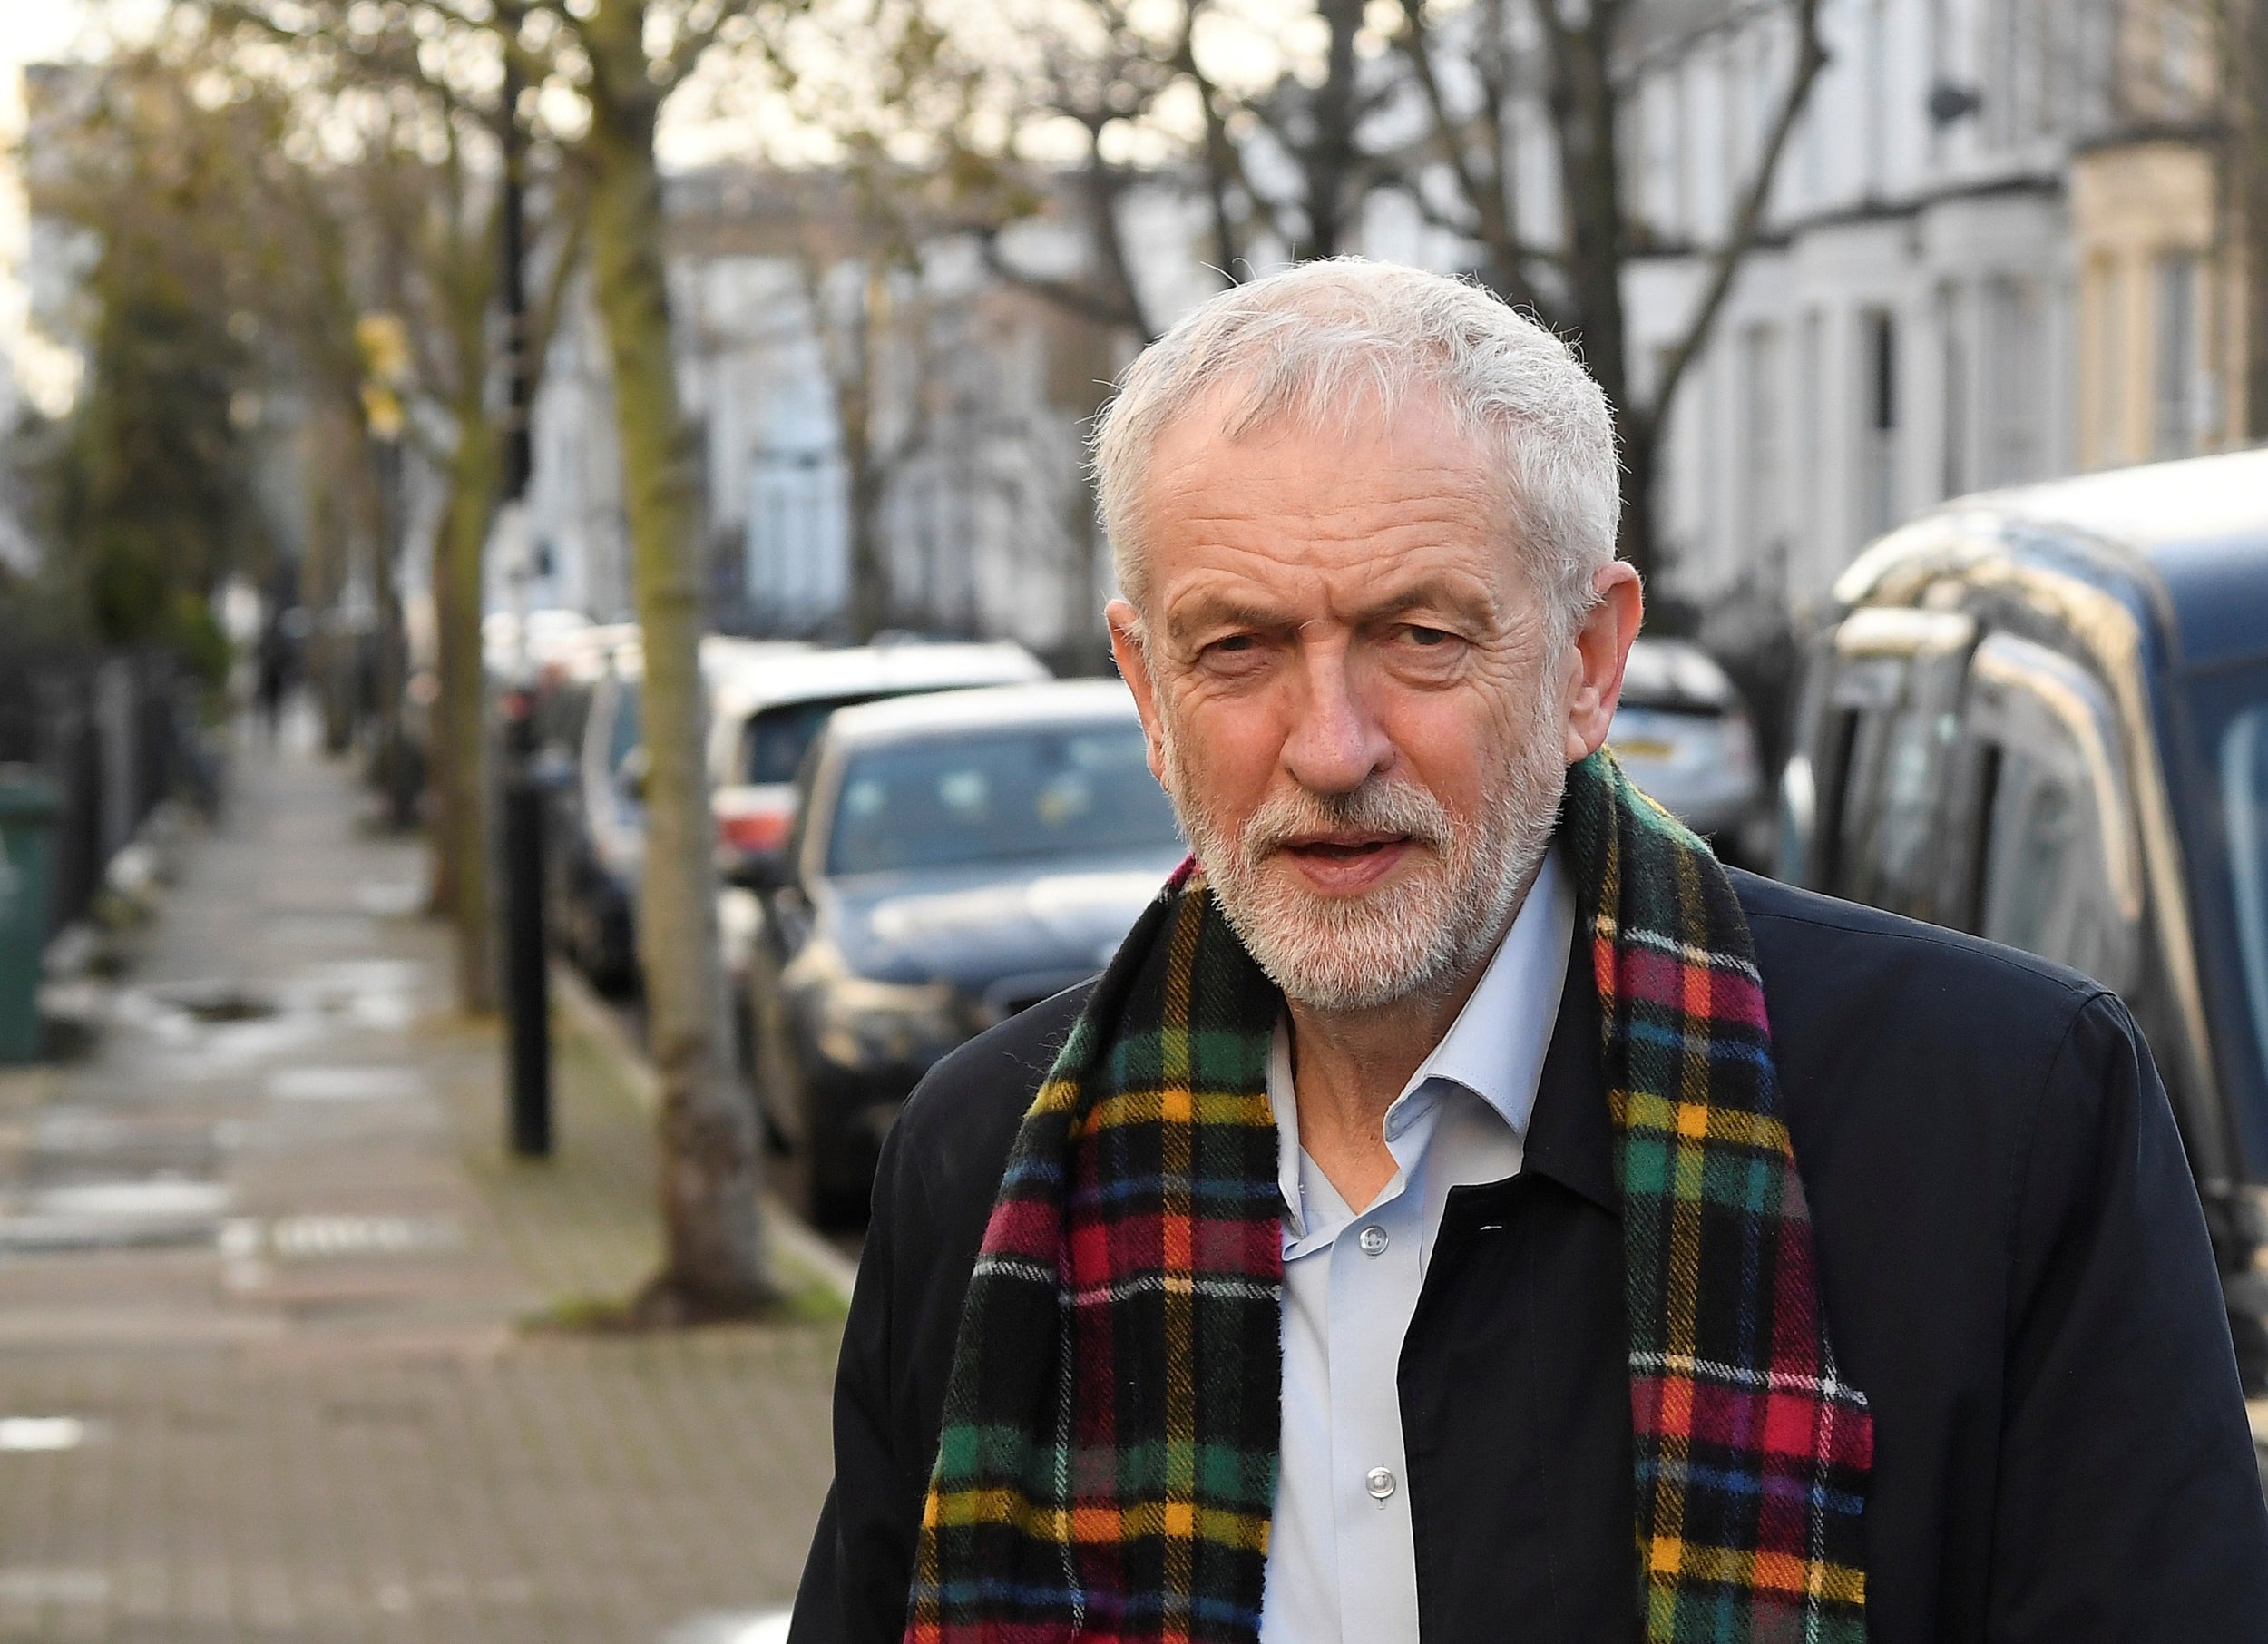 Labour leadership: Demands for Jeremy Corbyn to apologise as he faces MPs after historic defeat